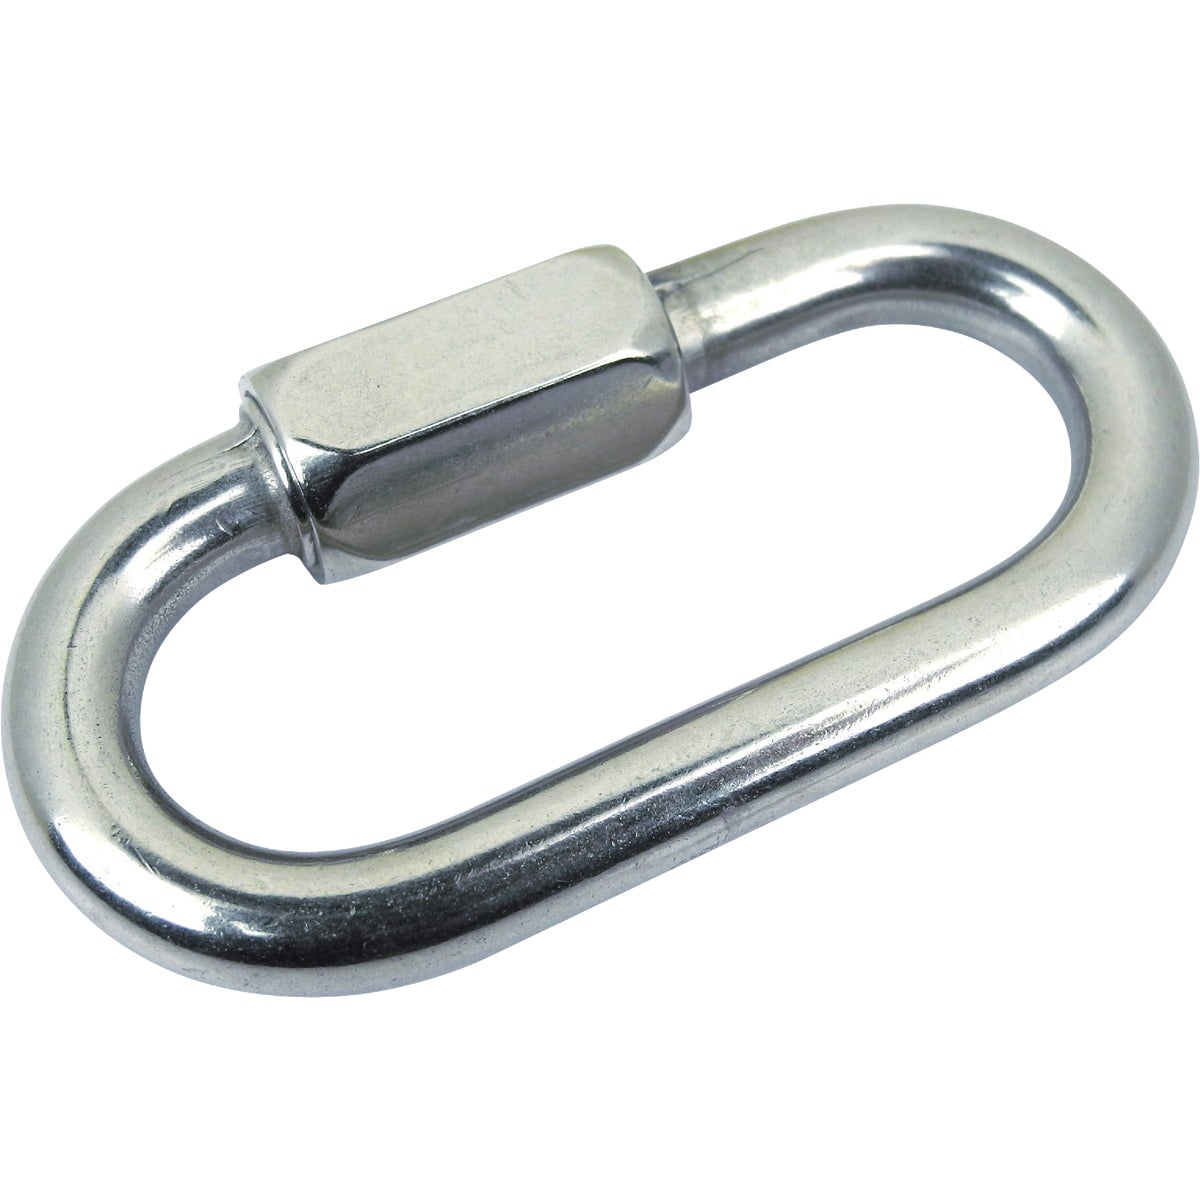 Item 573025, Durable reusable connecting quick link made of cast stainless steel.